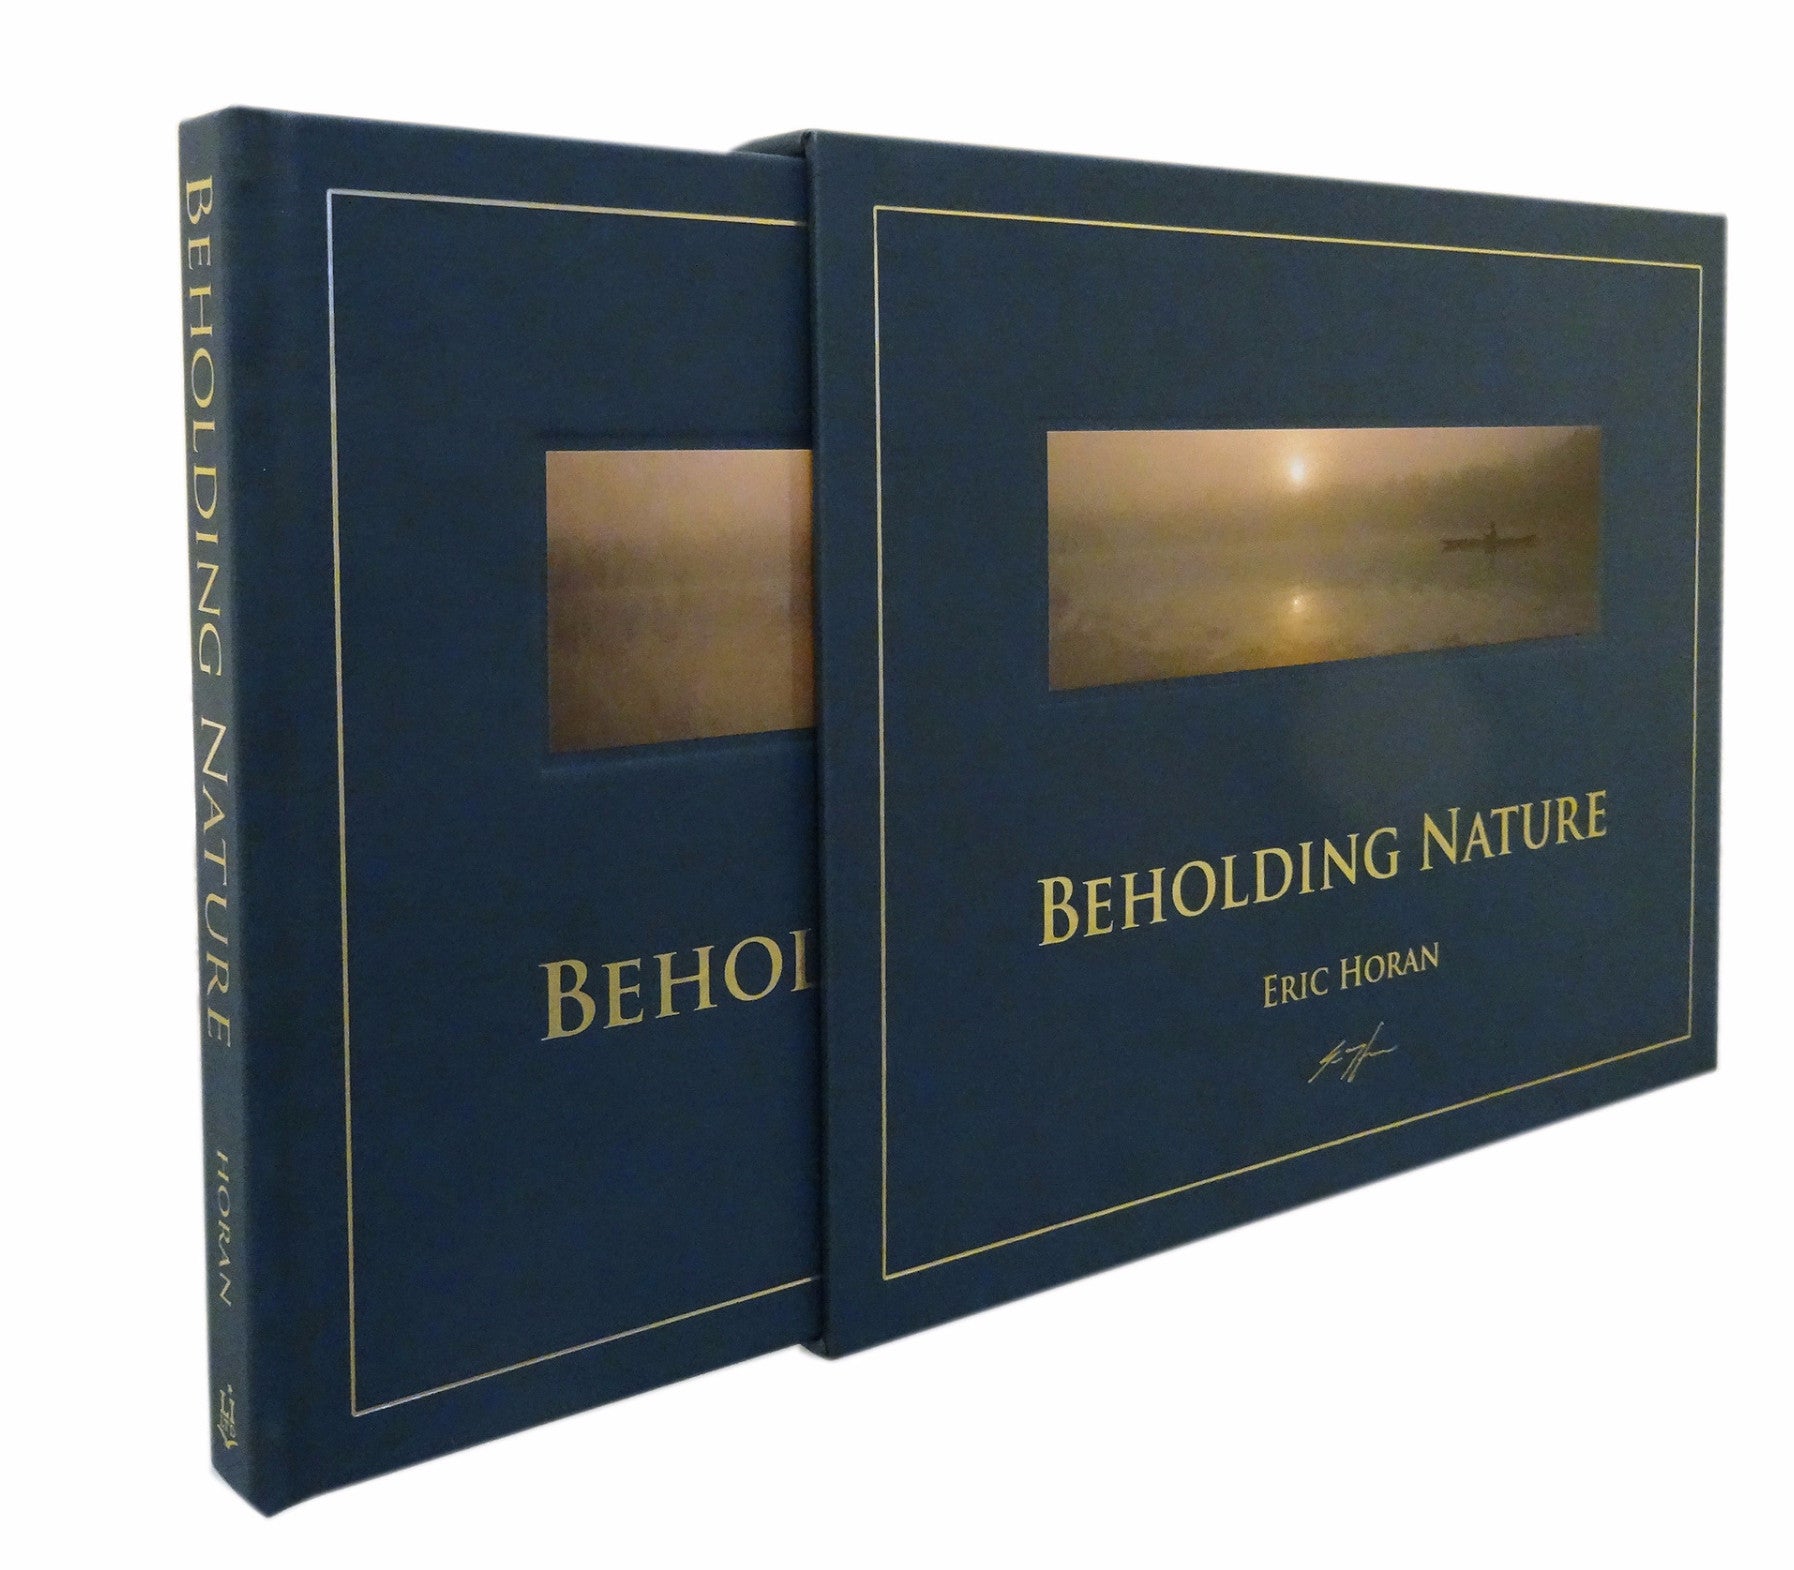 Collectors Edition Beholding Nature Photography book Eric Horan and Starbooks